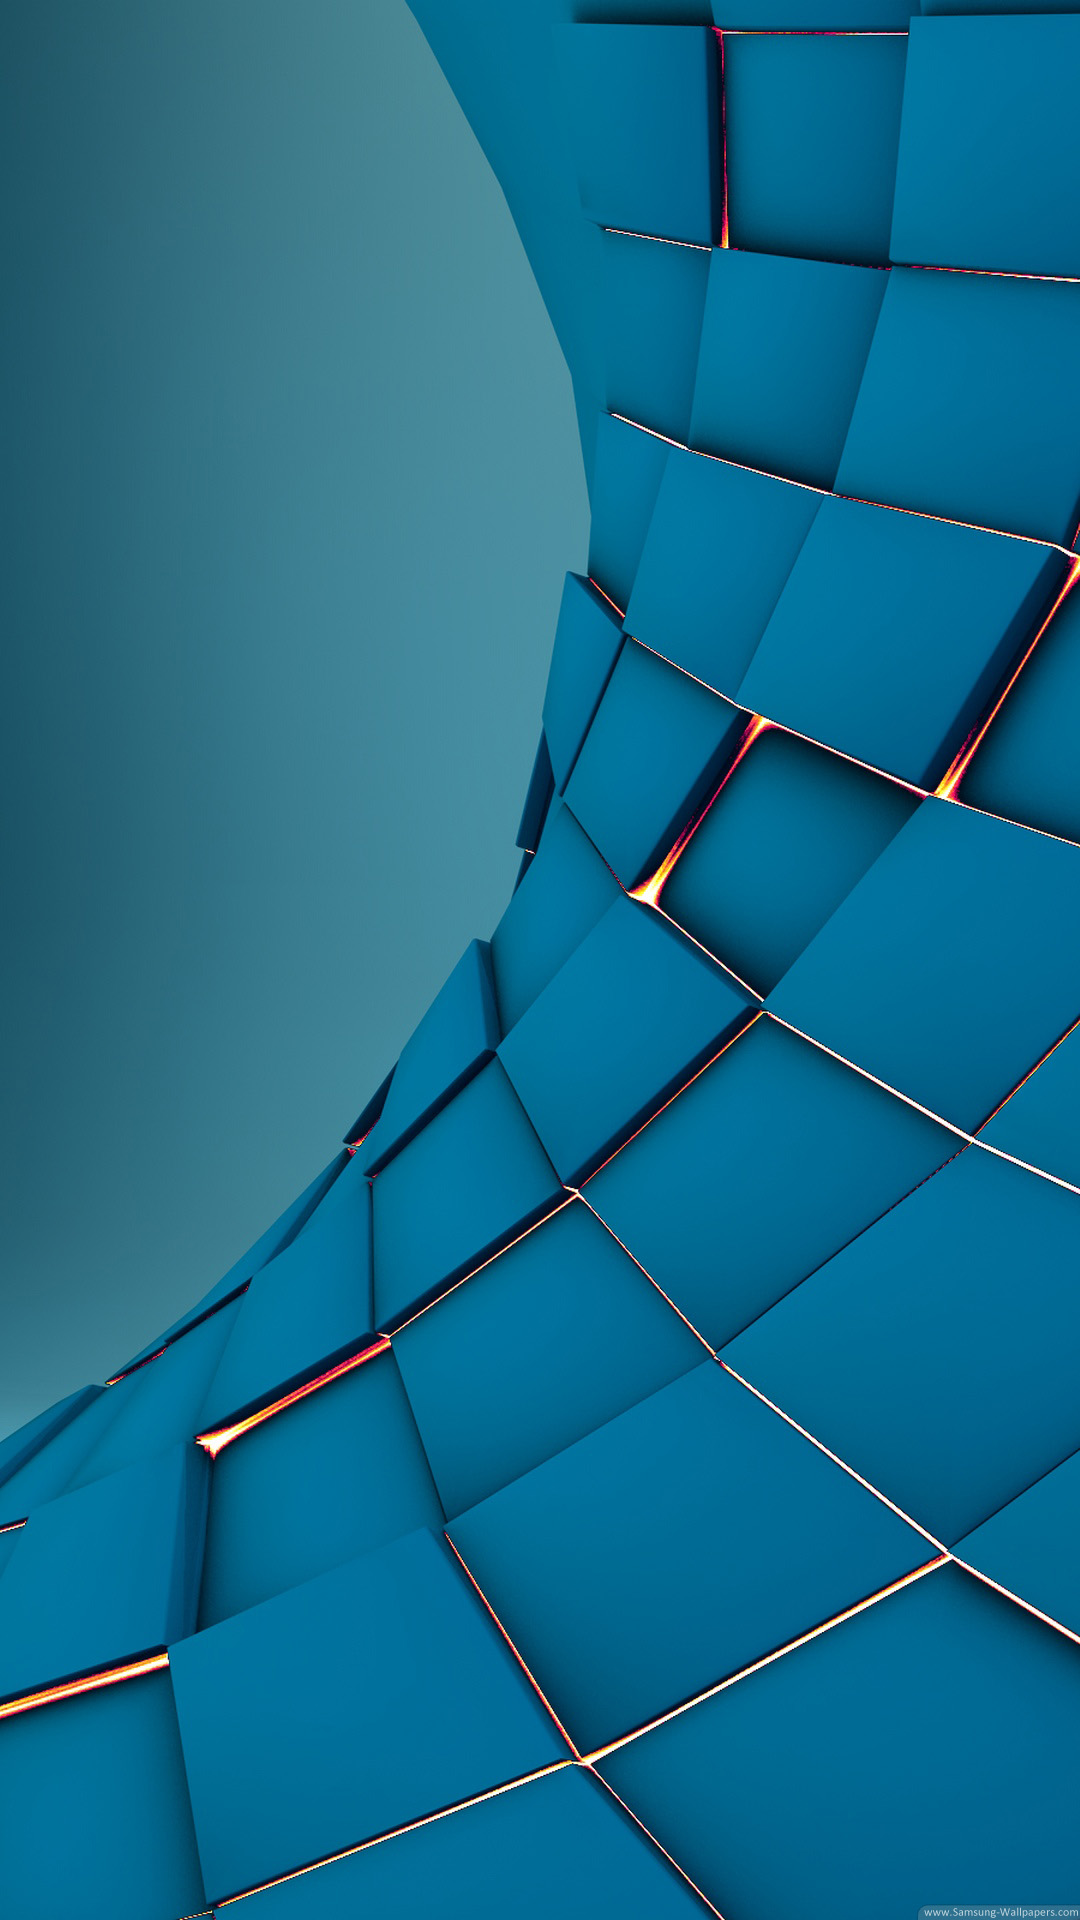 3D Squares Under Glow Abstract Render iPhone 6 Plus HD Wallpaper